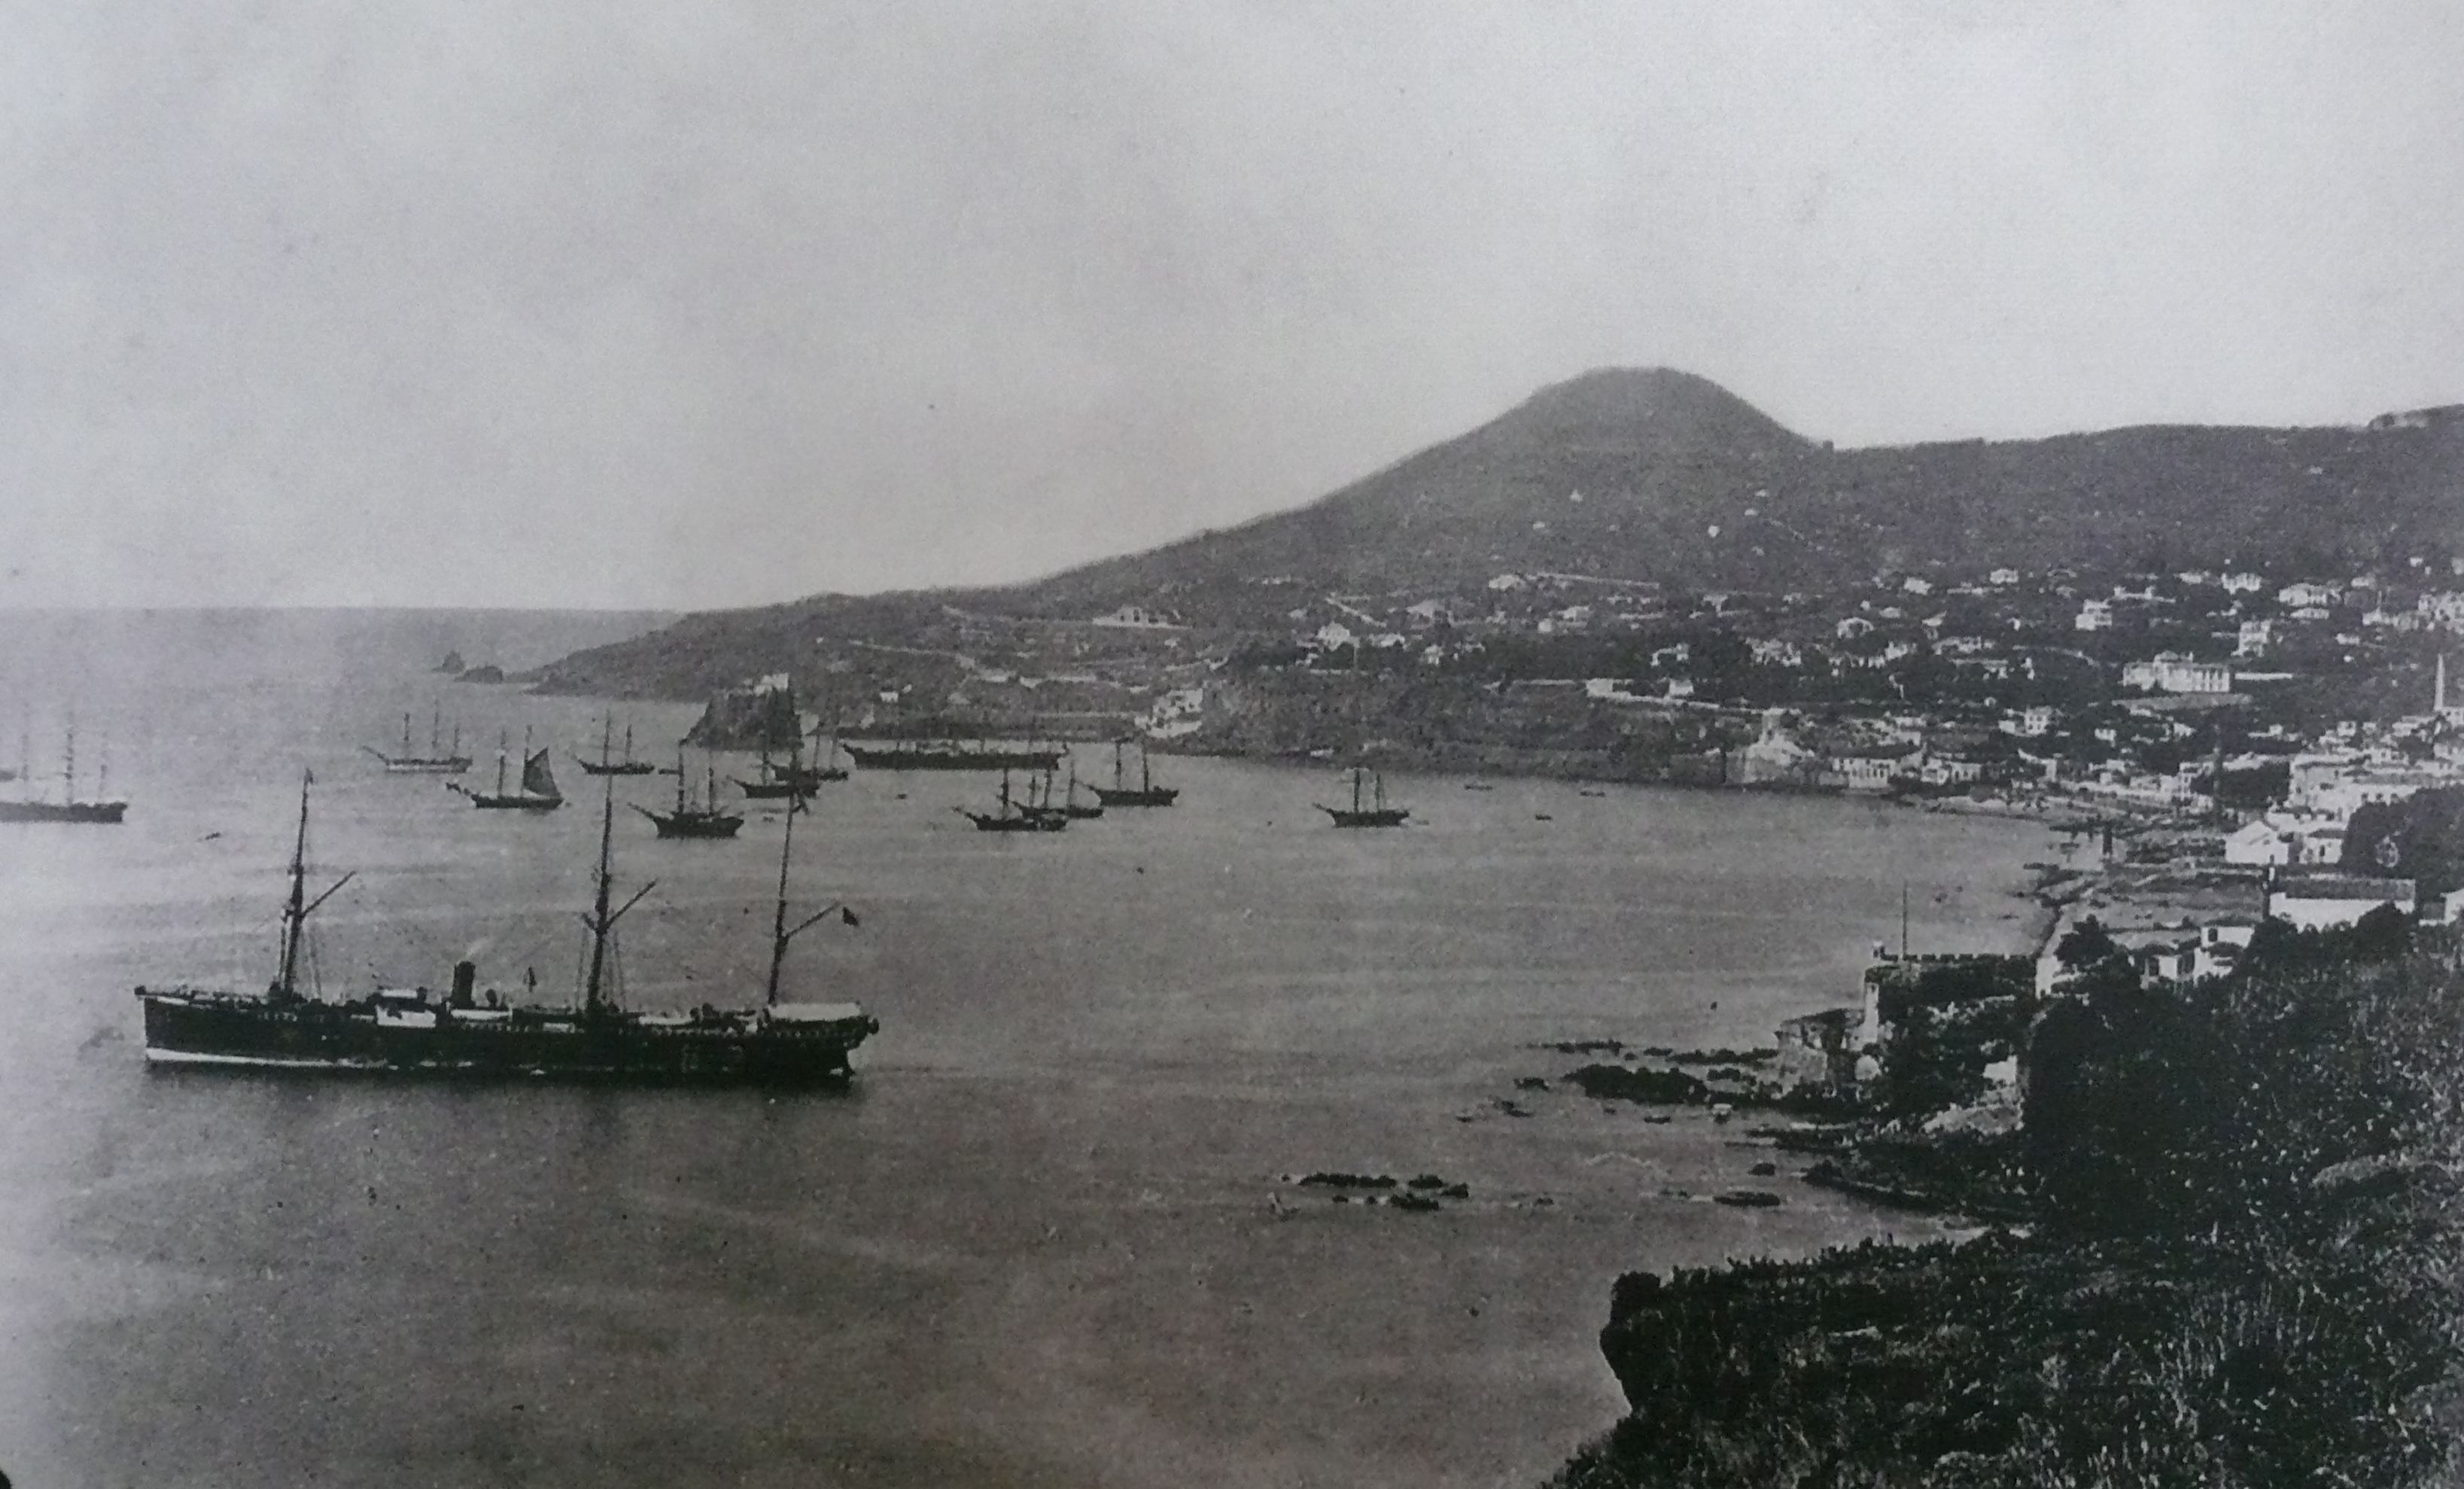 Sailing ships in Funchal many years ago